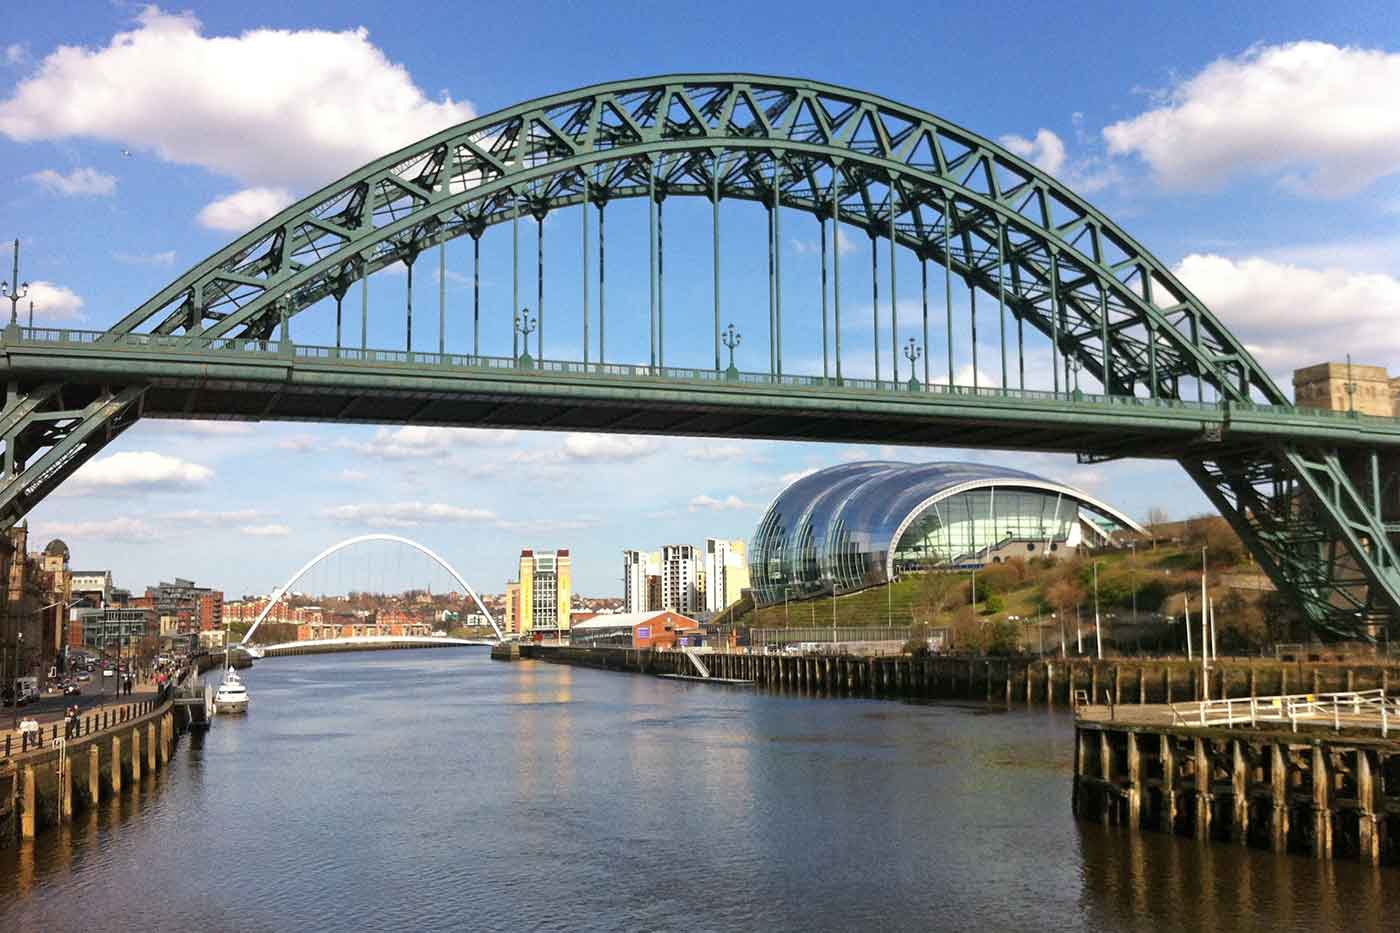 19 Must-See Tourist Attractions and Things to Do in Newcastle upon Tyne